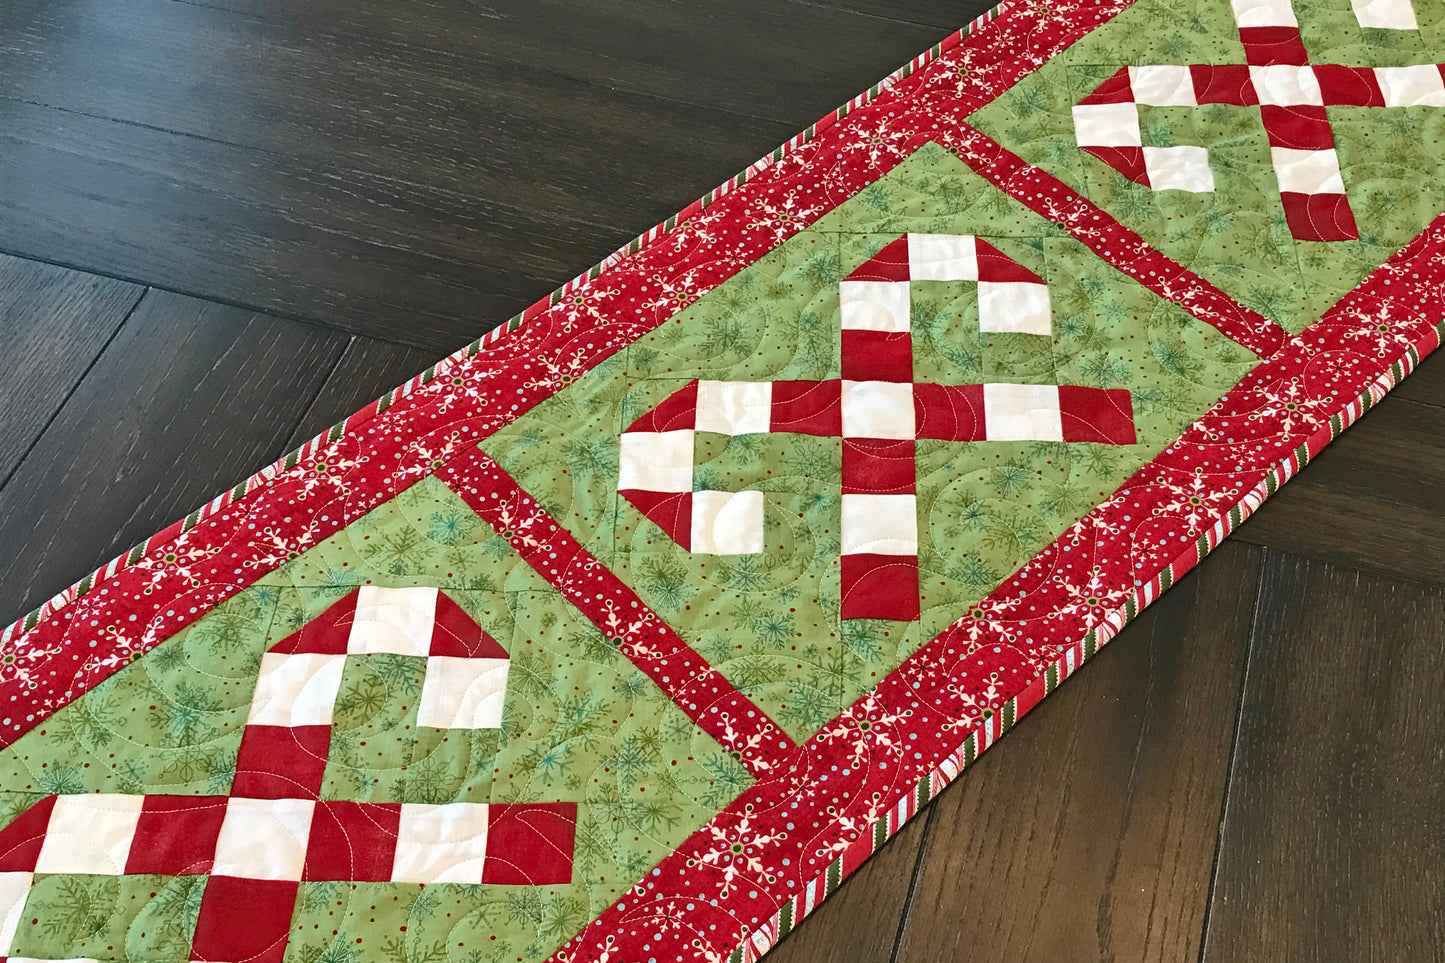 Candy Cane Lane Table Runner Pattern - Digital Pattern - Handmade Quilts, Digital Patterns, and Home Décor items online - Cuddle Cat Quiltworks